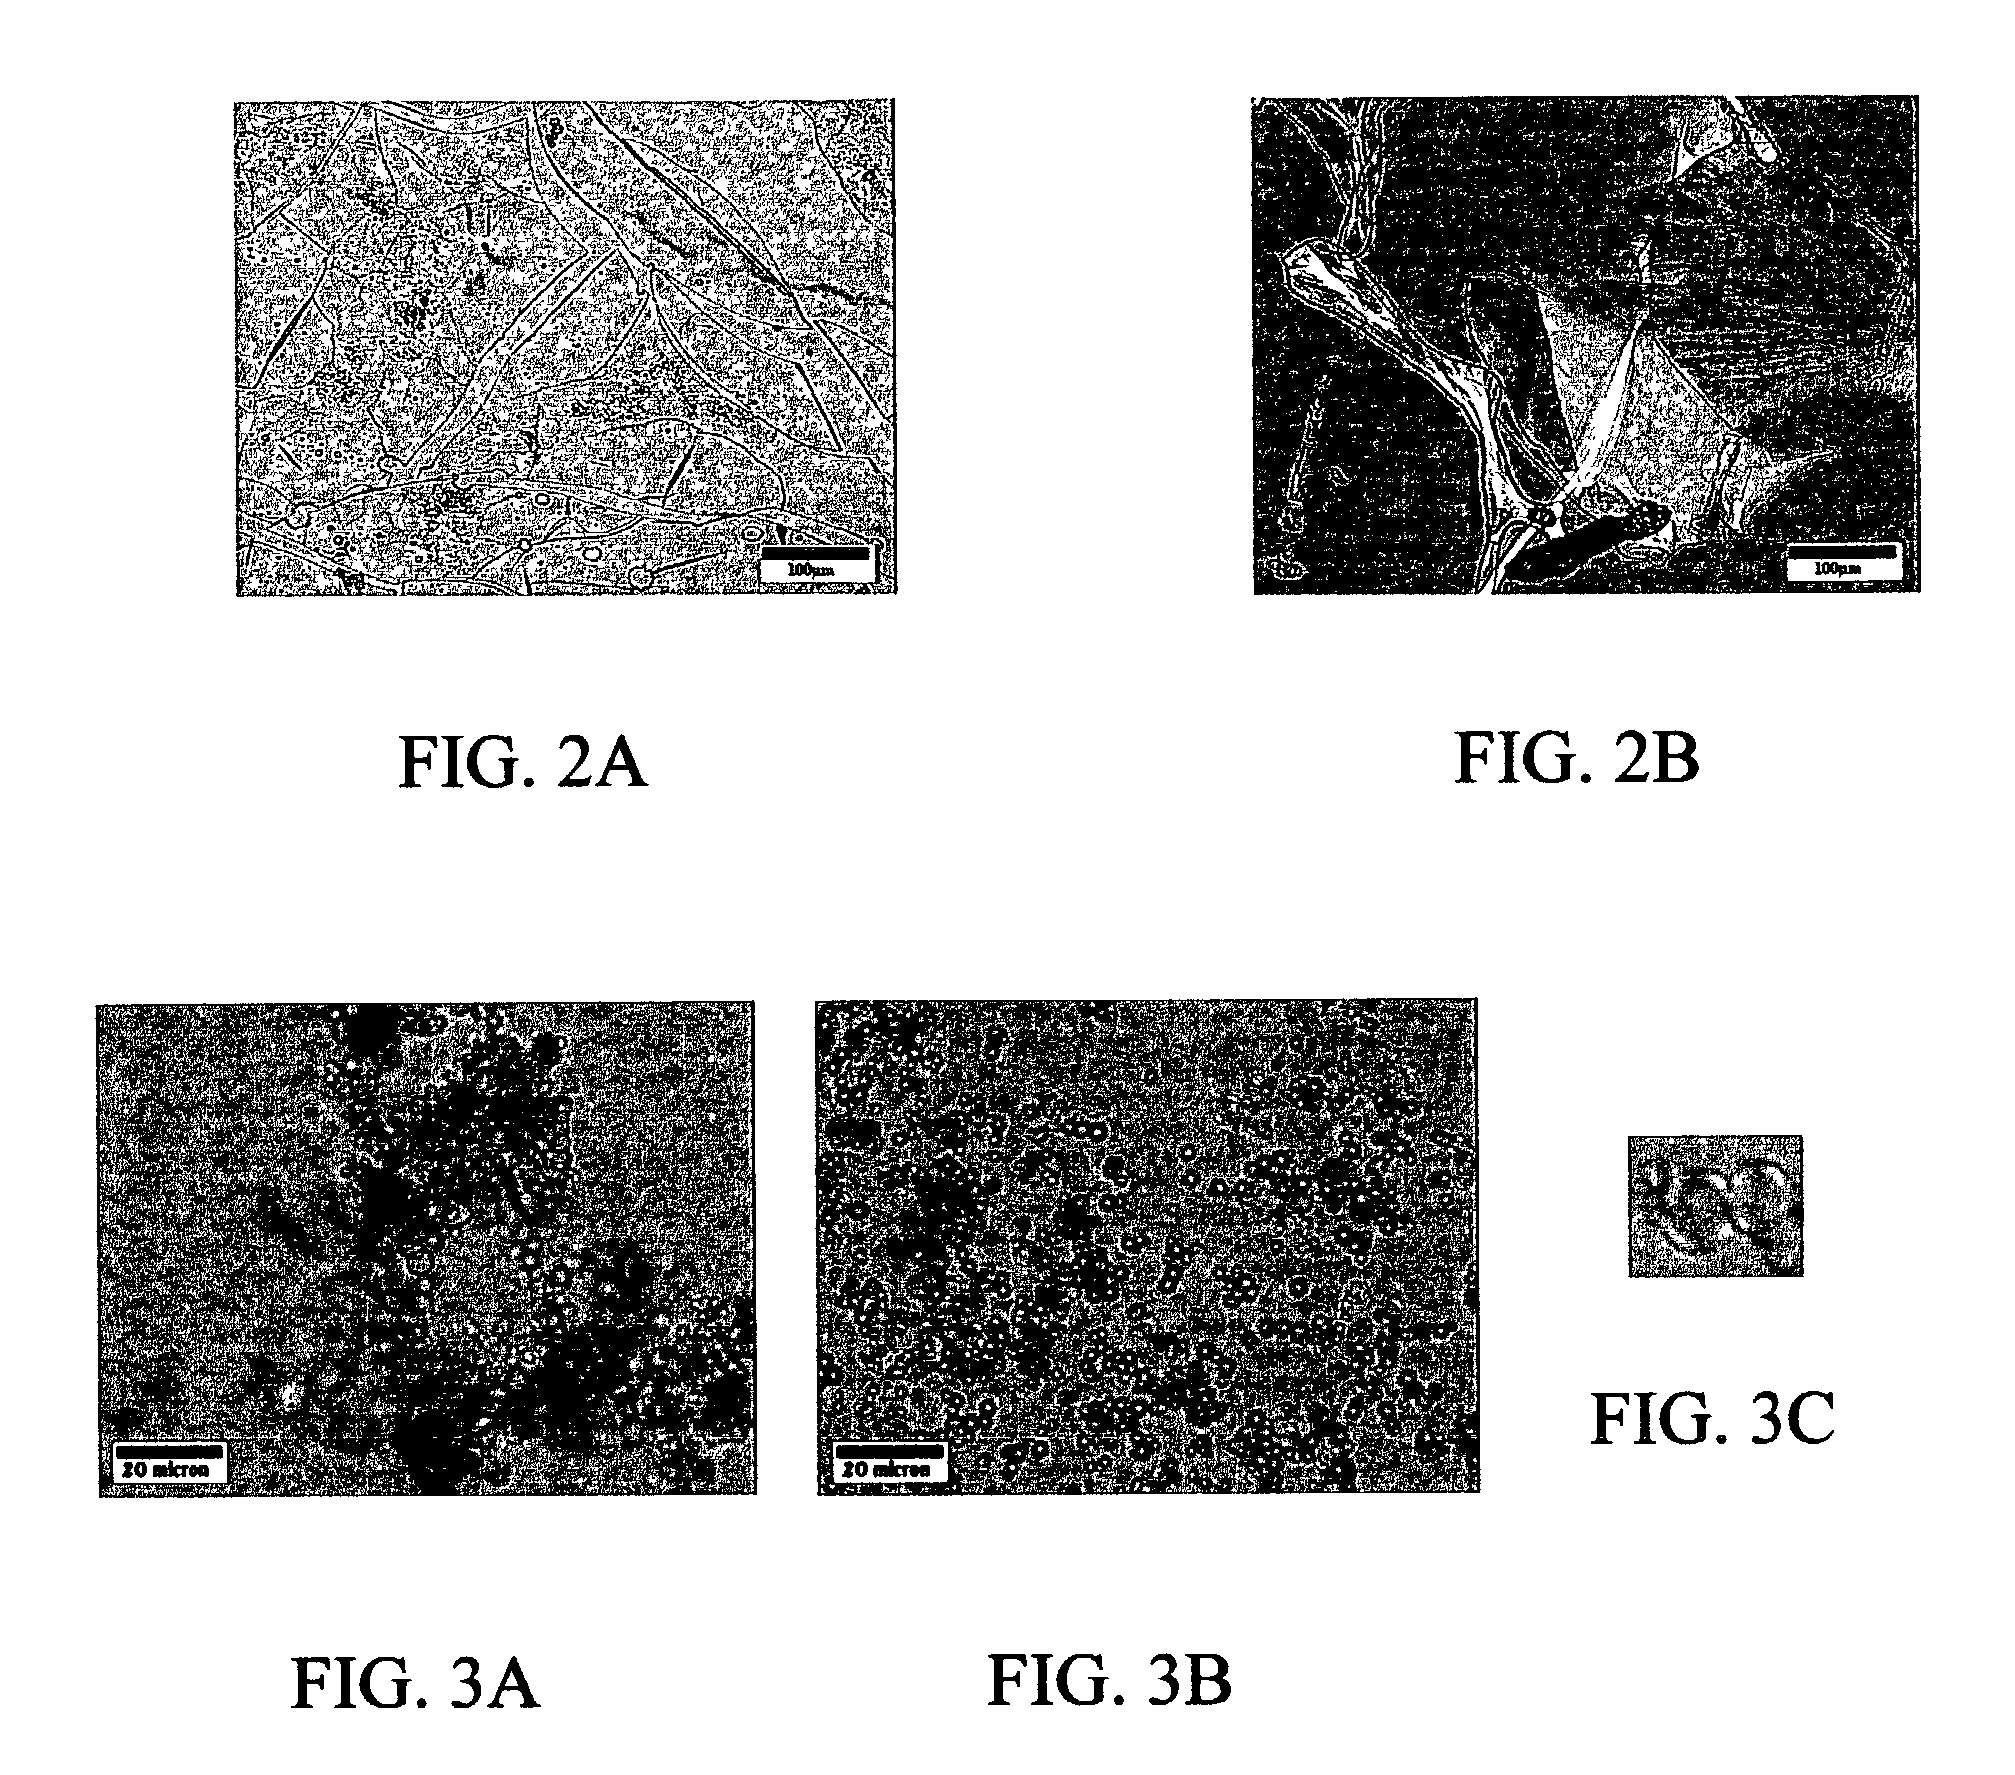 Materials and methods for drug delivery and uptake